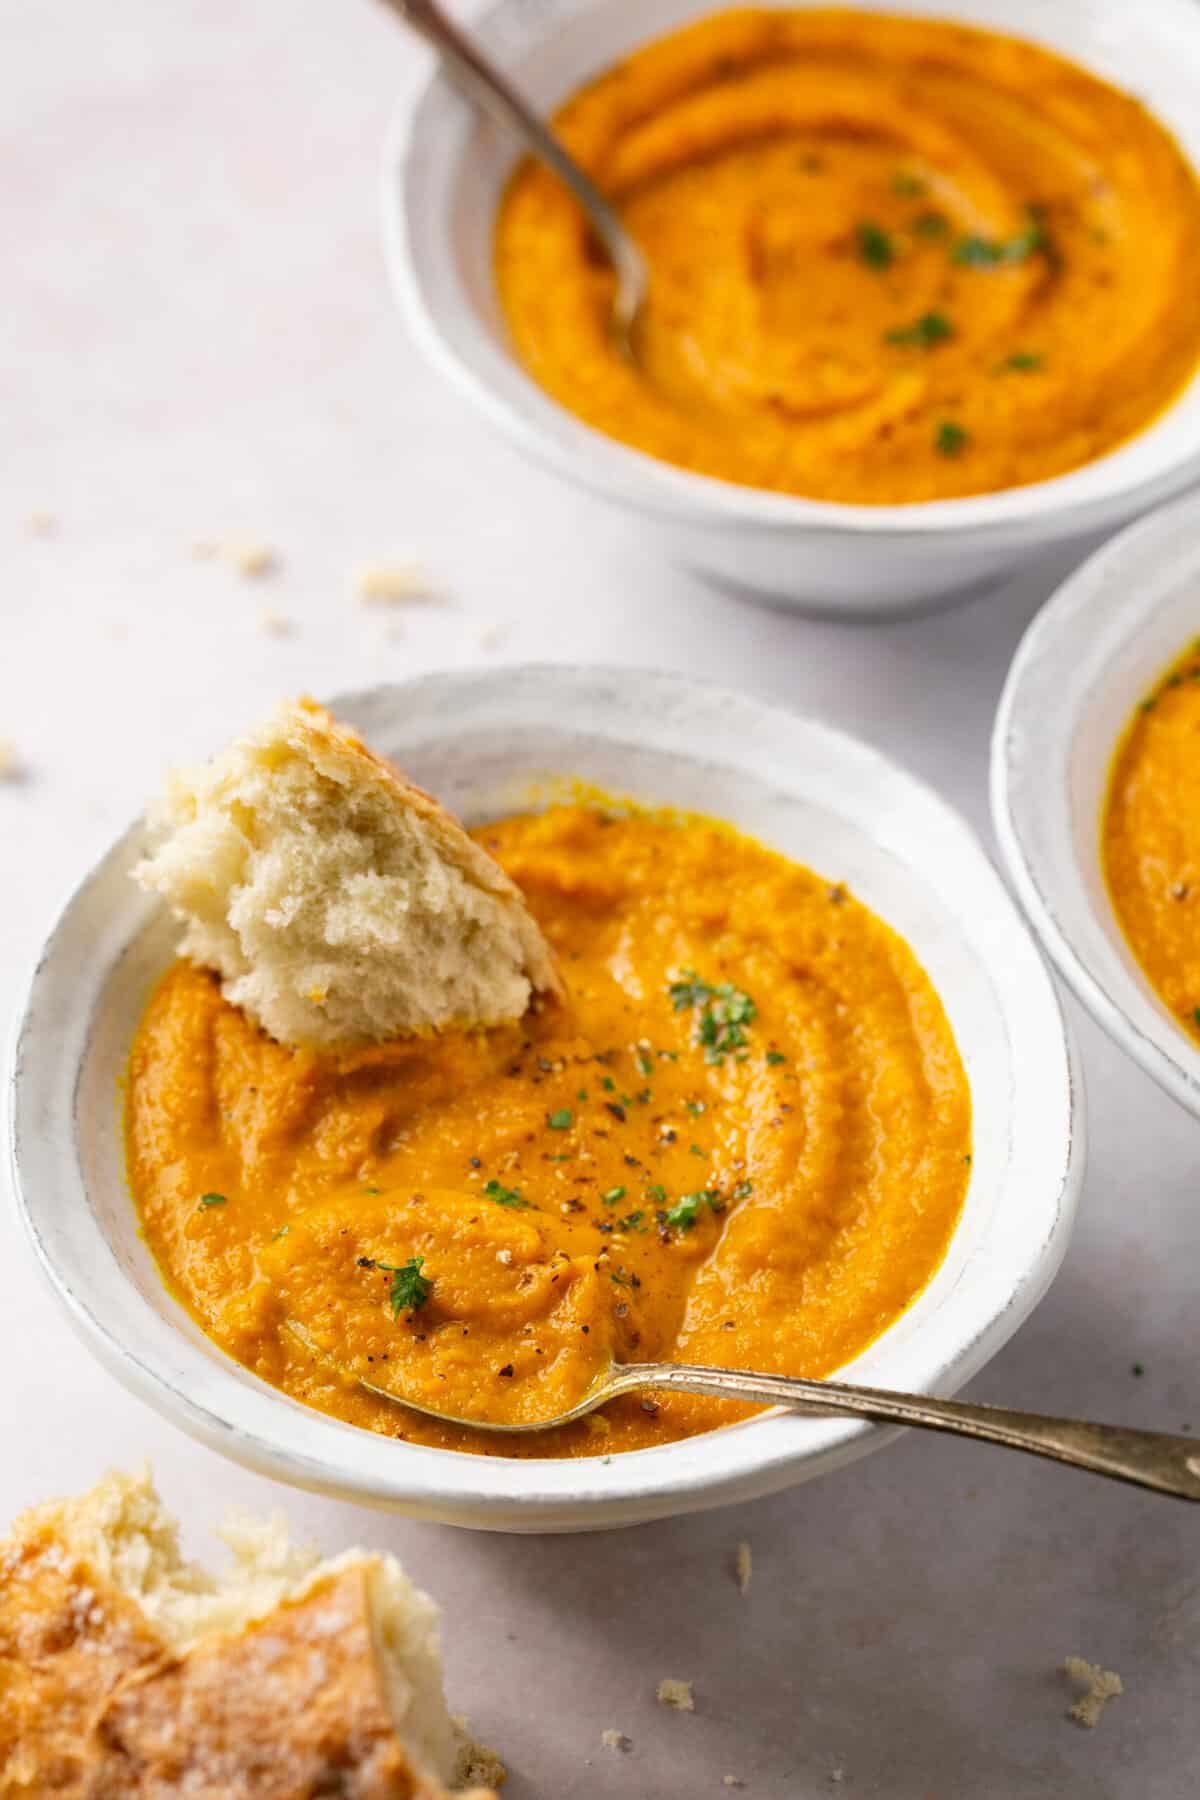 Bowls of creamy carrot turnip soup, with a piece of crusty bread in it.